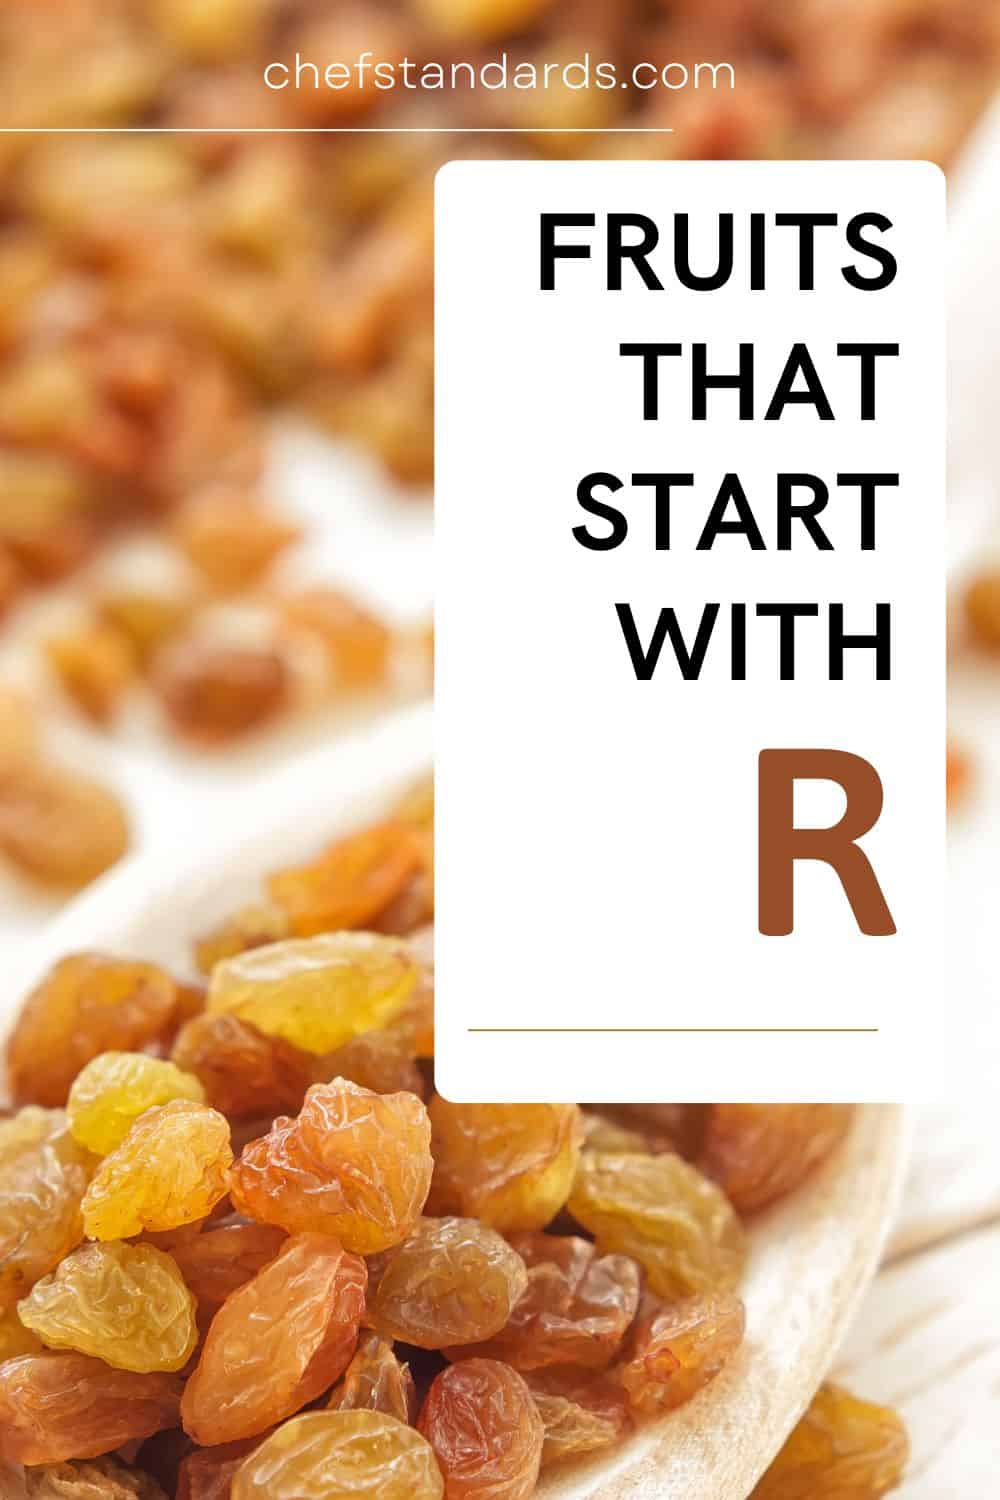 30 Fruits That Start With R (+ Interesting Facts)
